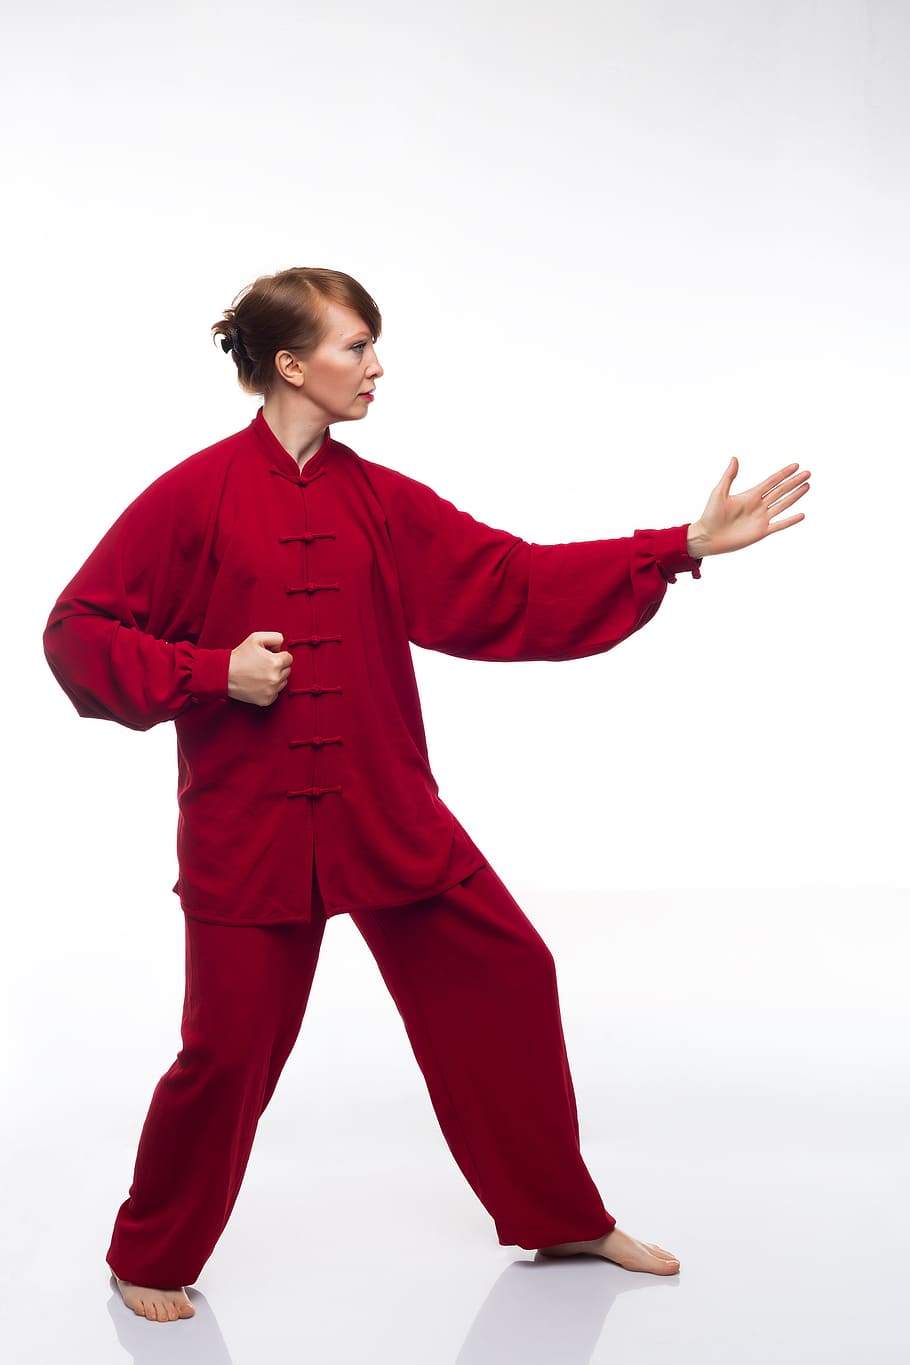 young, stand-alone, taijiquan, martial arts, qigong, taichi, woman, red, one person, white background